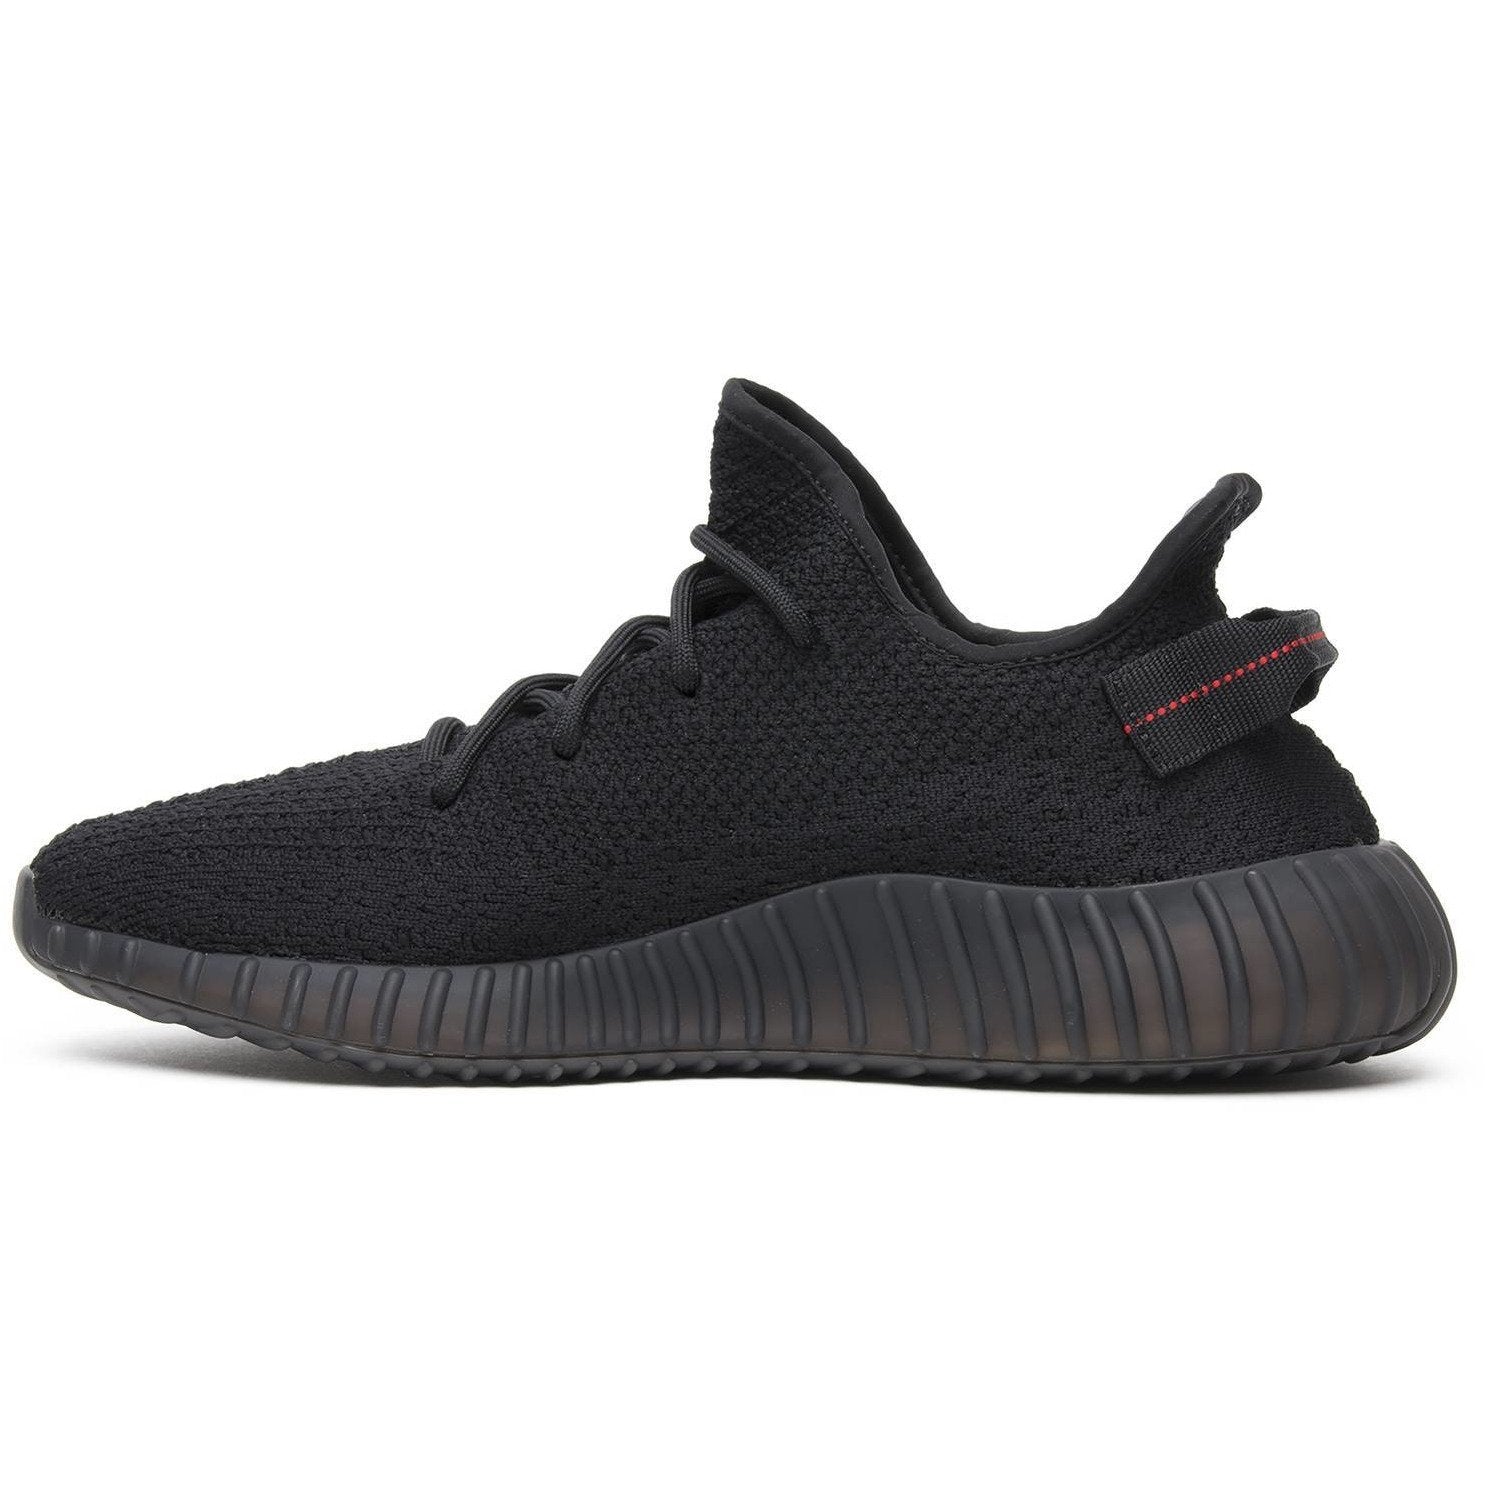 adidas Yeezy Boost 350 V2 'Bred' - After Burn